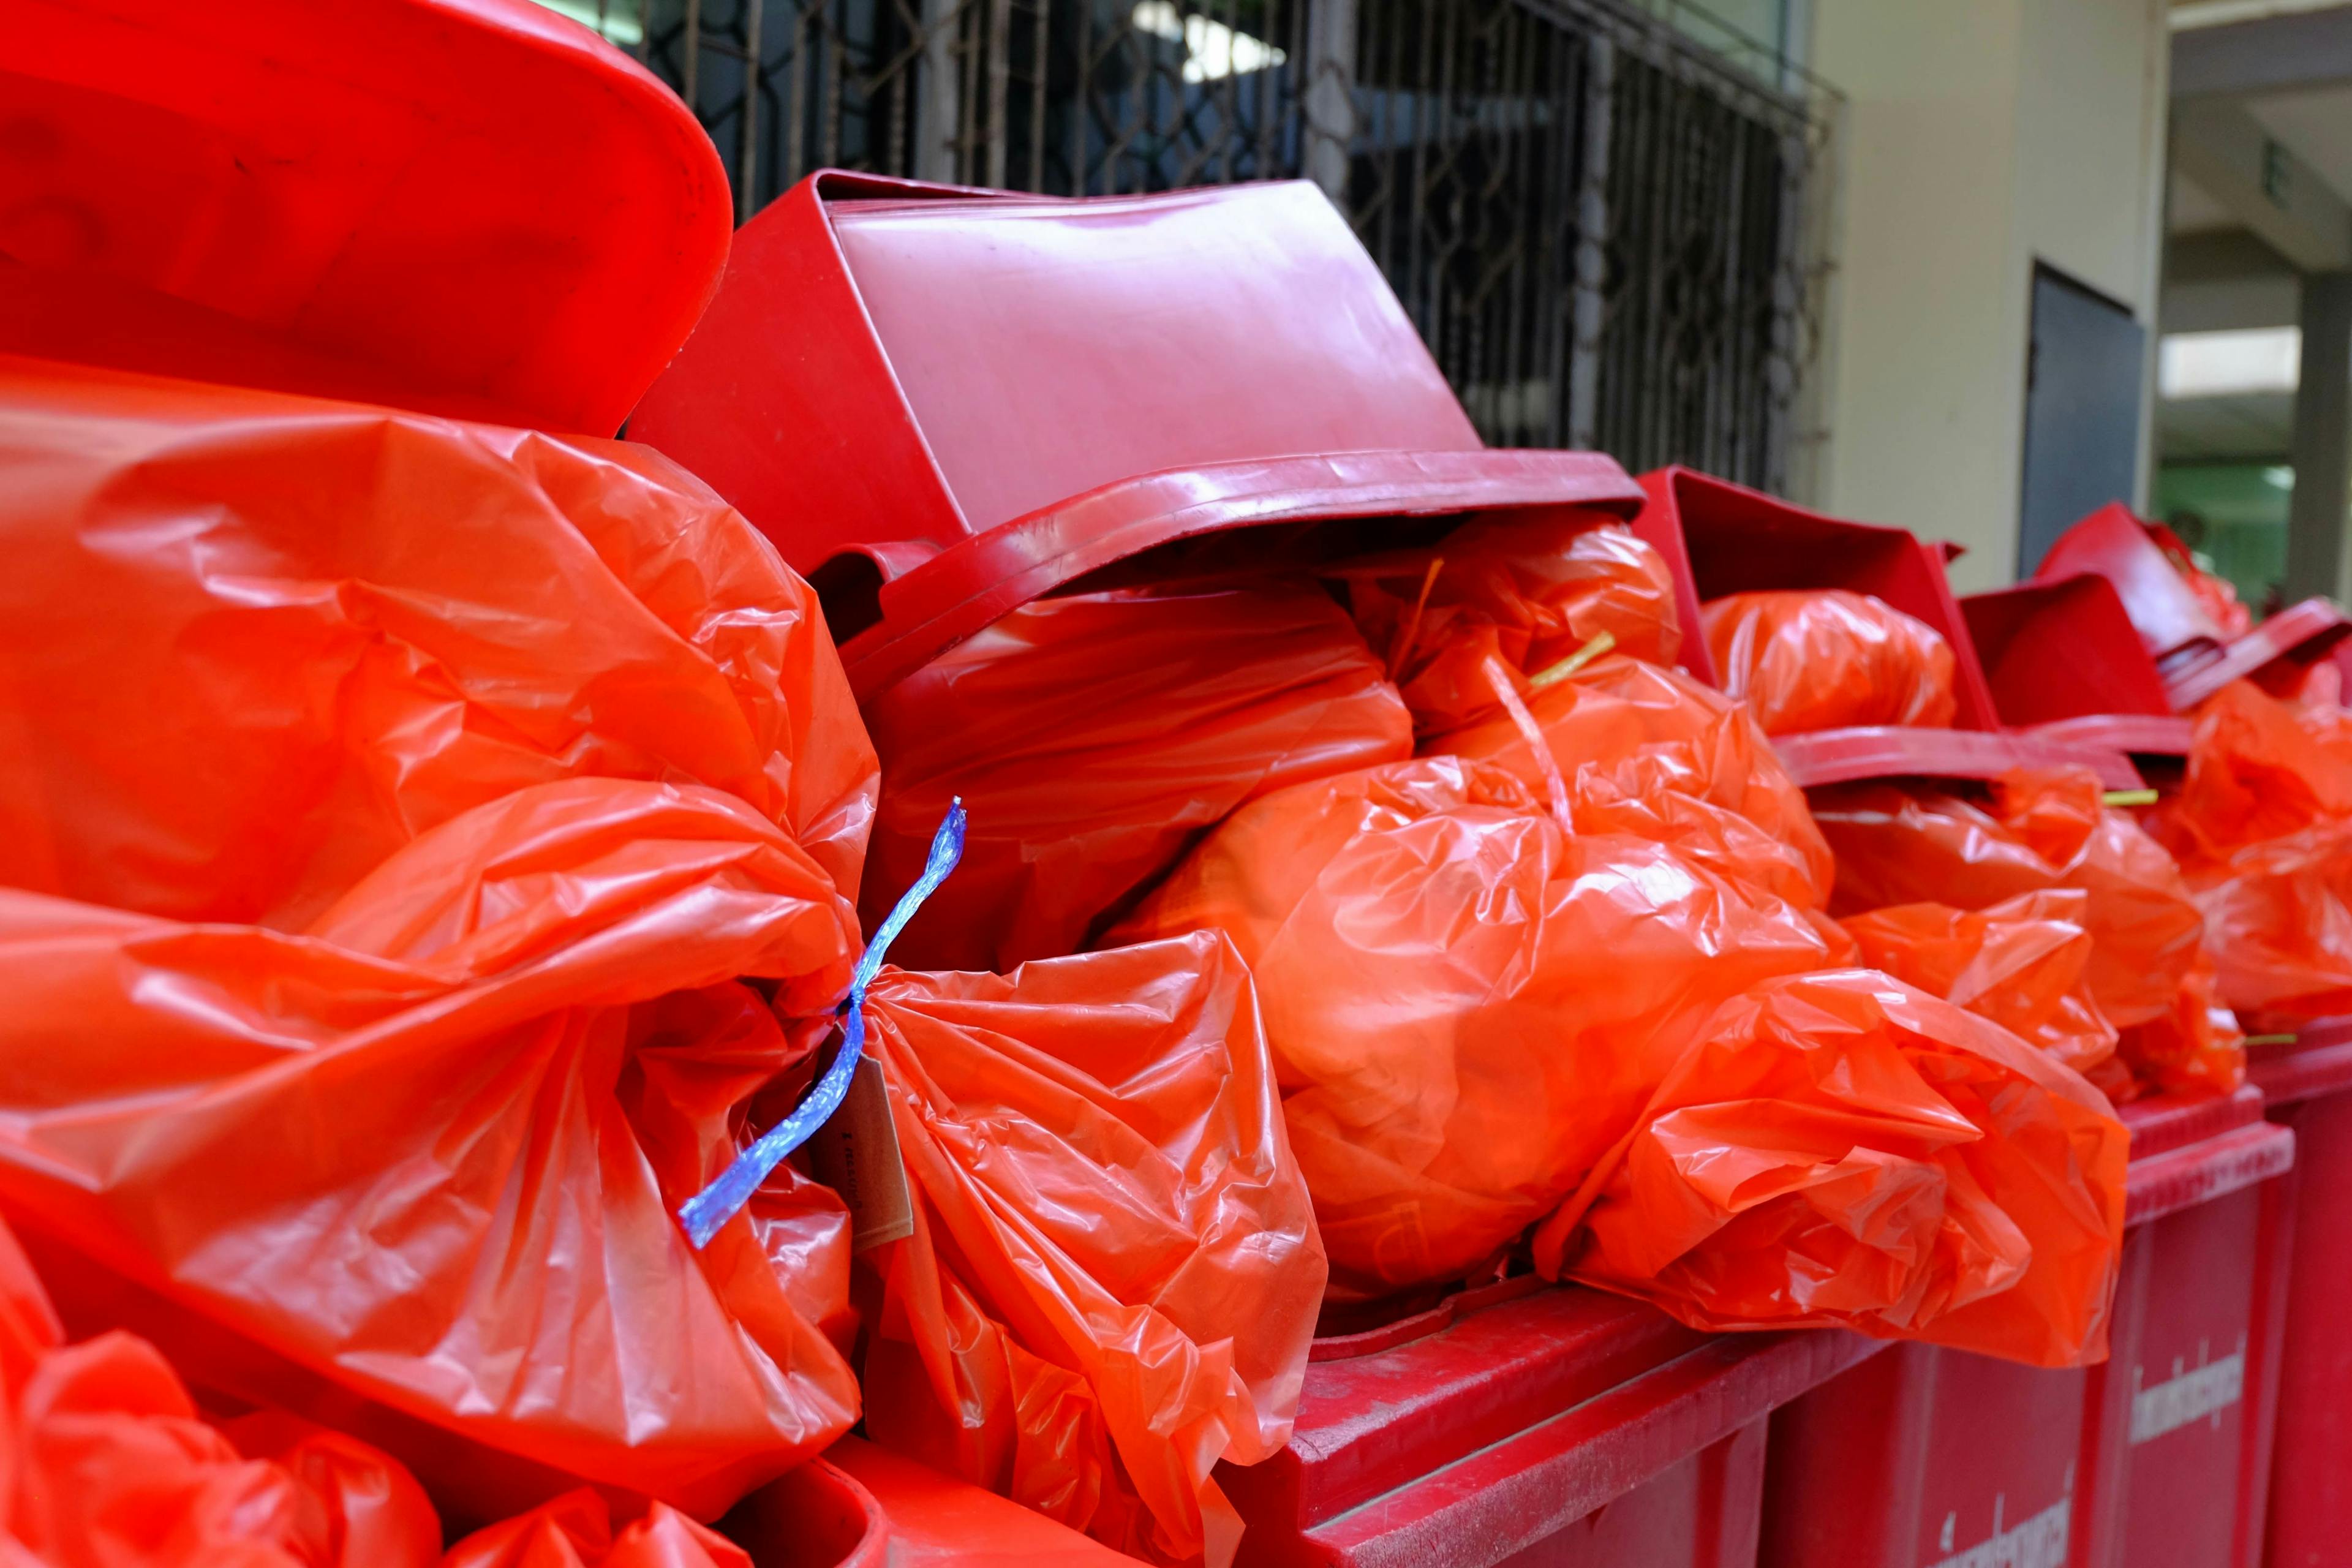 Red trash cans overflowing with red bags of biohazardous waste